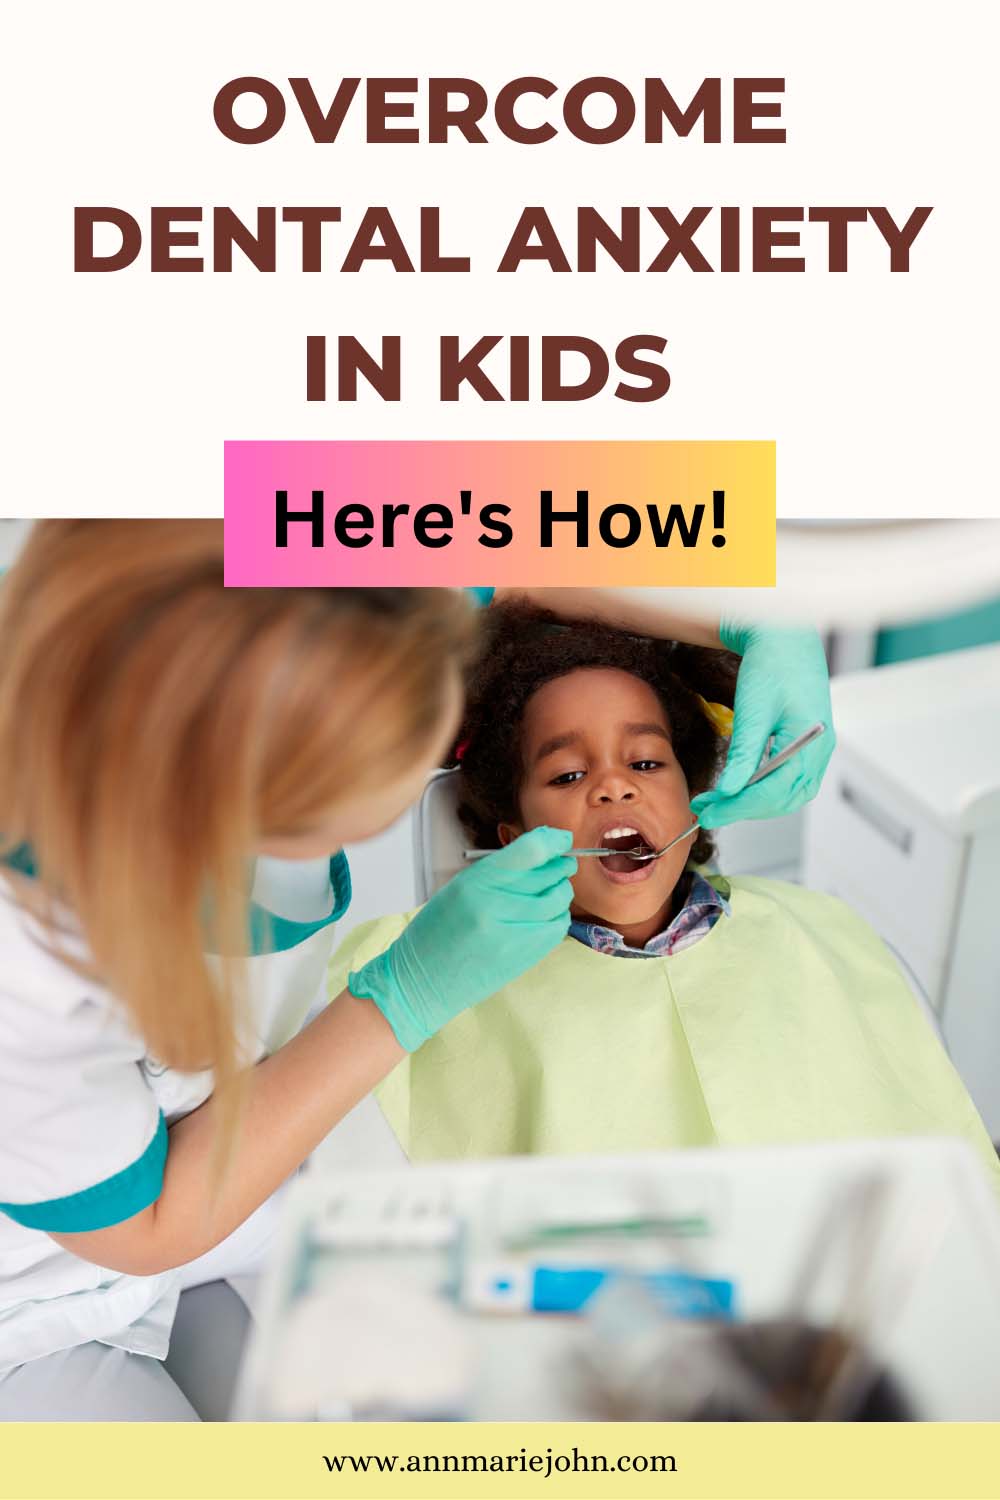 Overcome Dental Anxiety in Kids